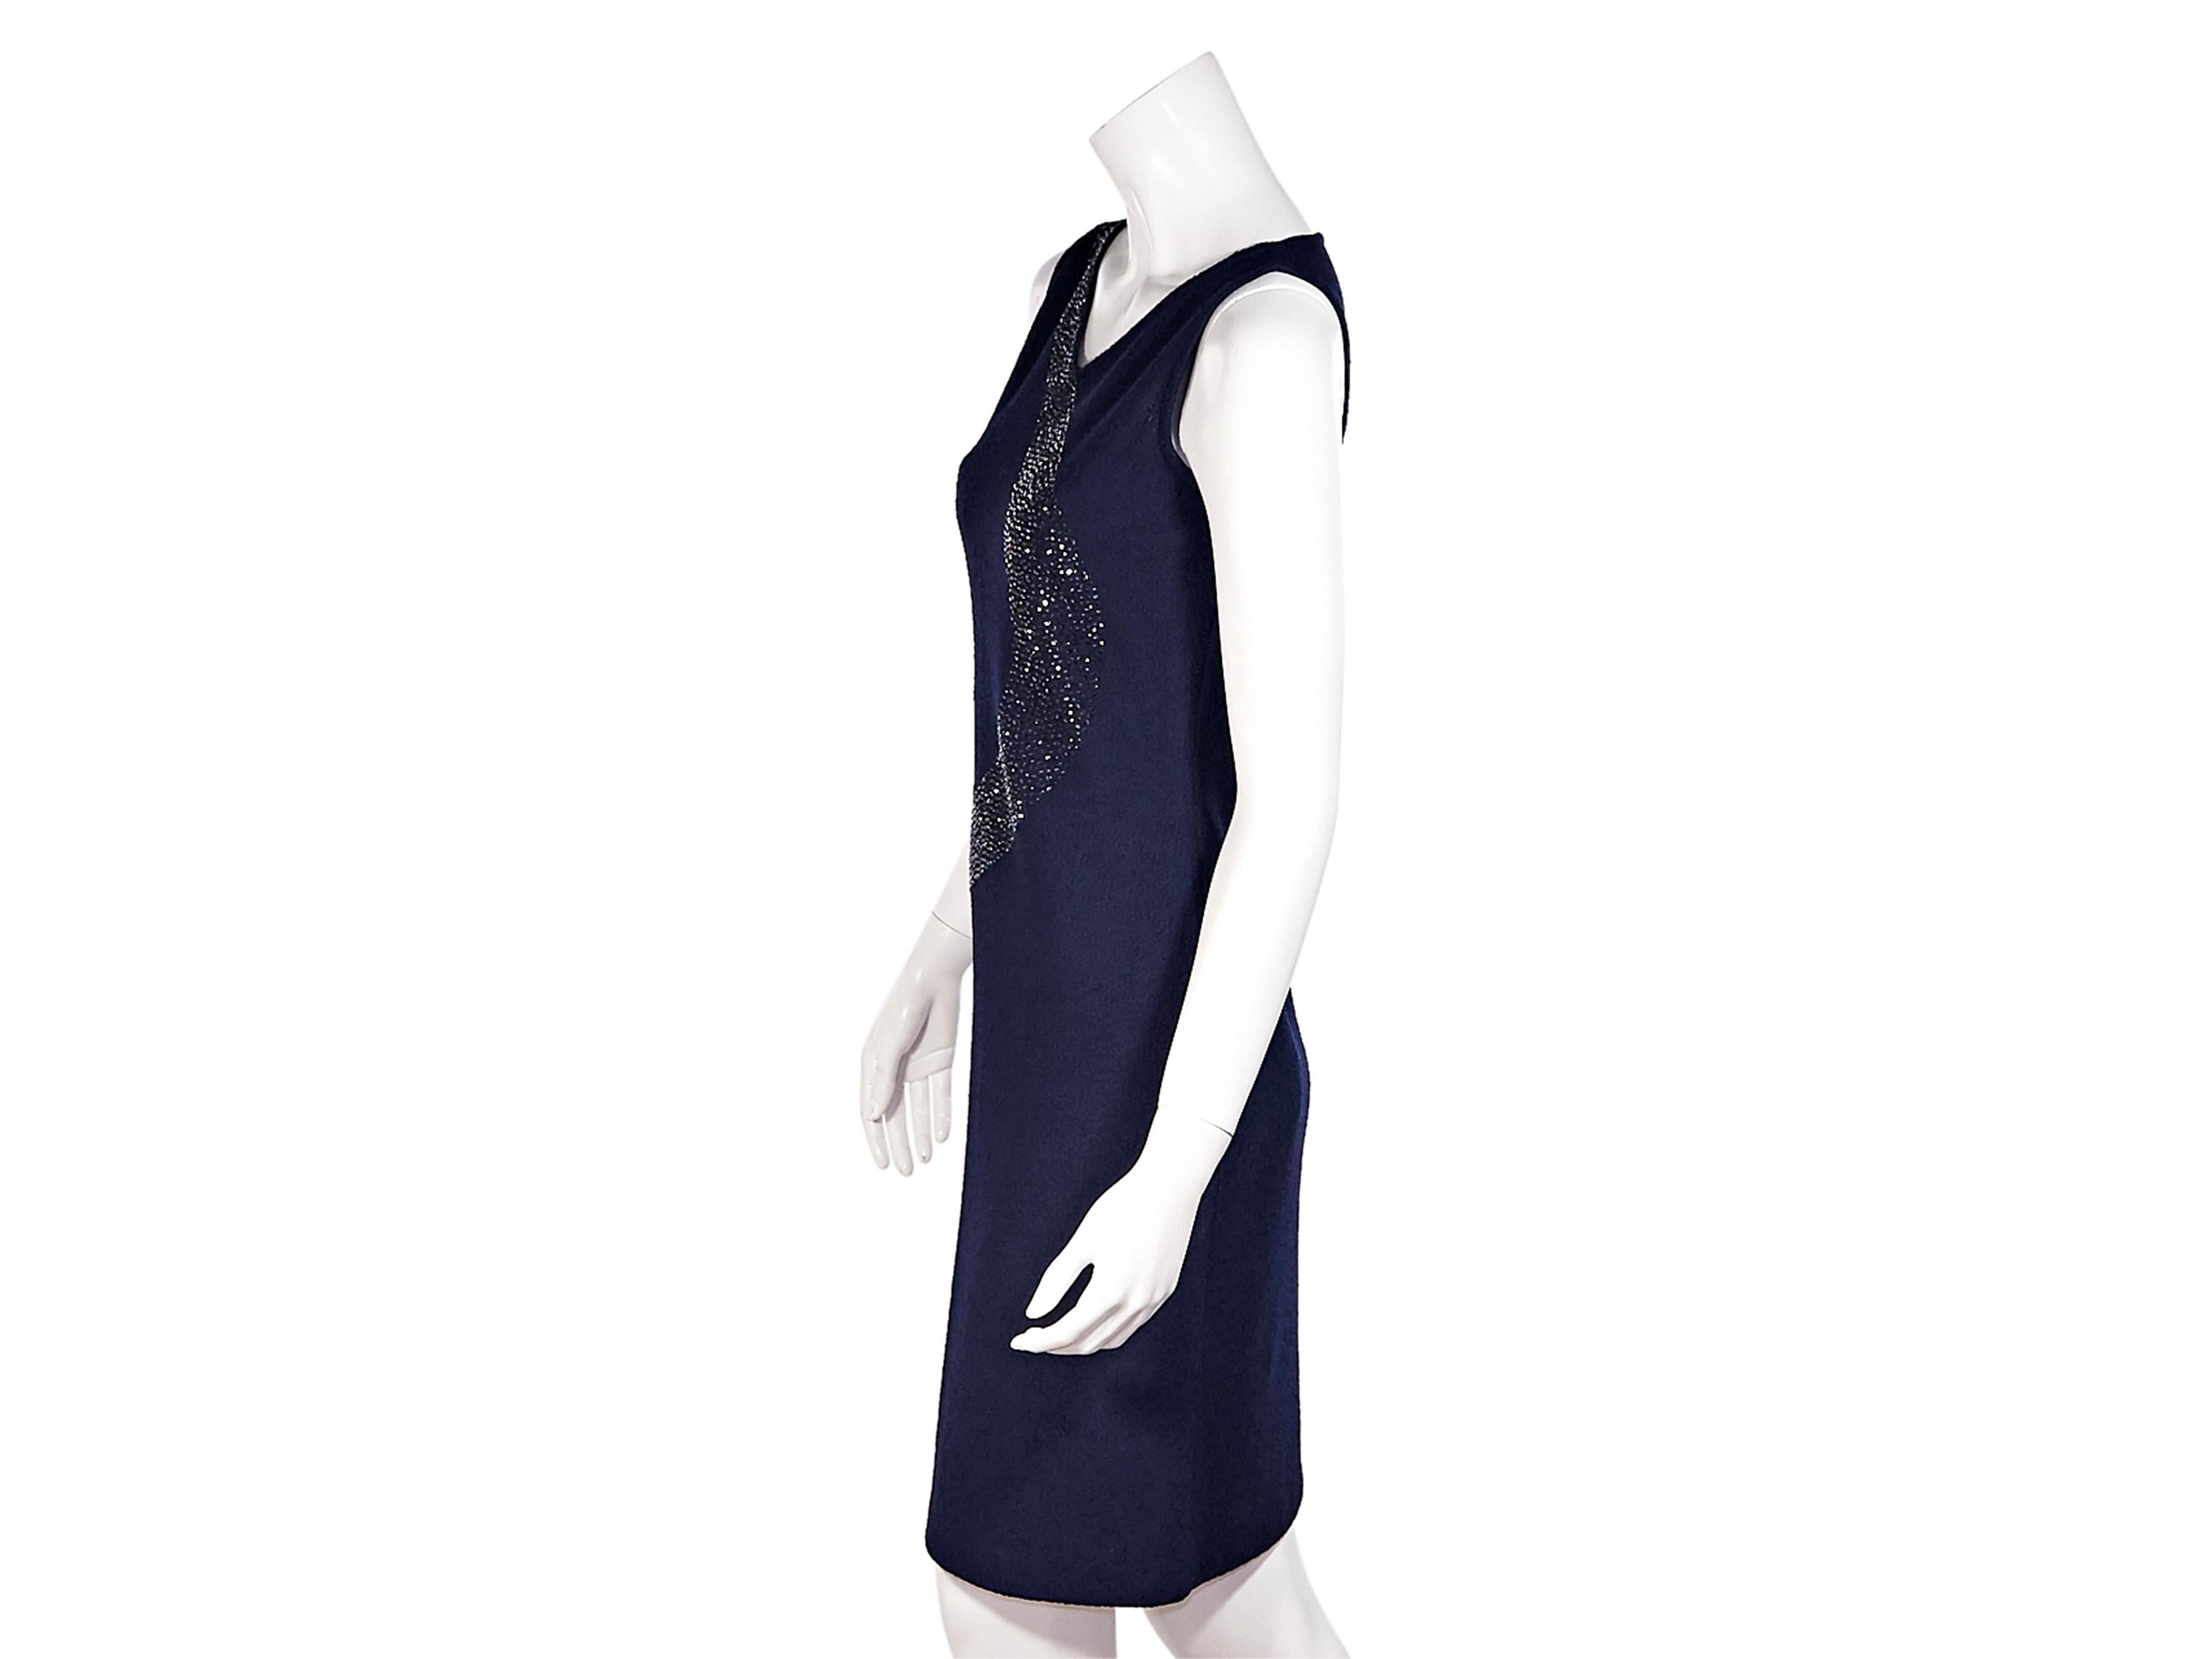 Product details:  Navy crystal embellished bouclé knee-length dress by St. John. V-neck. Sleeveless. Concealed back zip closure. Style yours with a tweed cropped jacket. 34